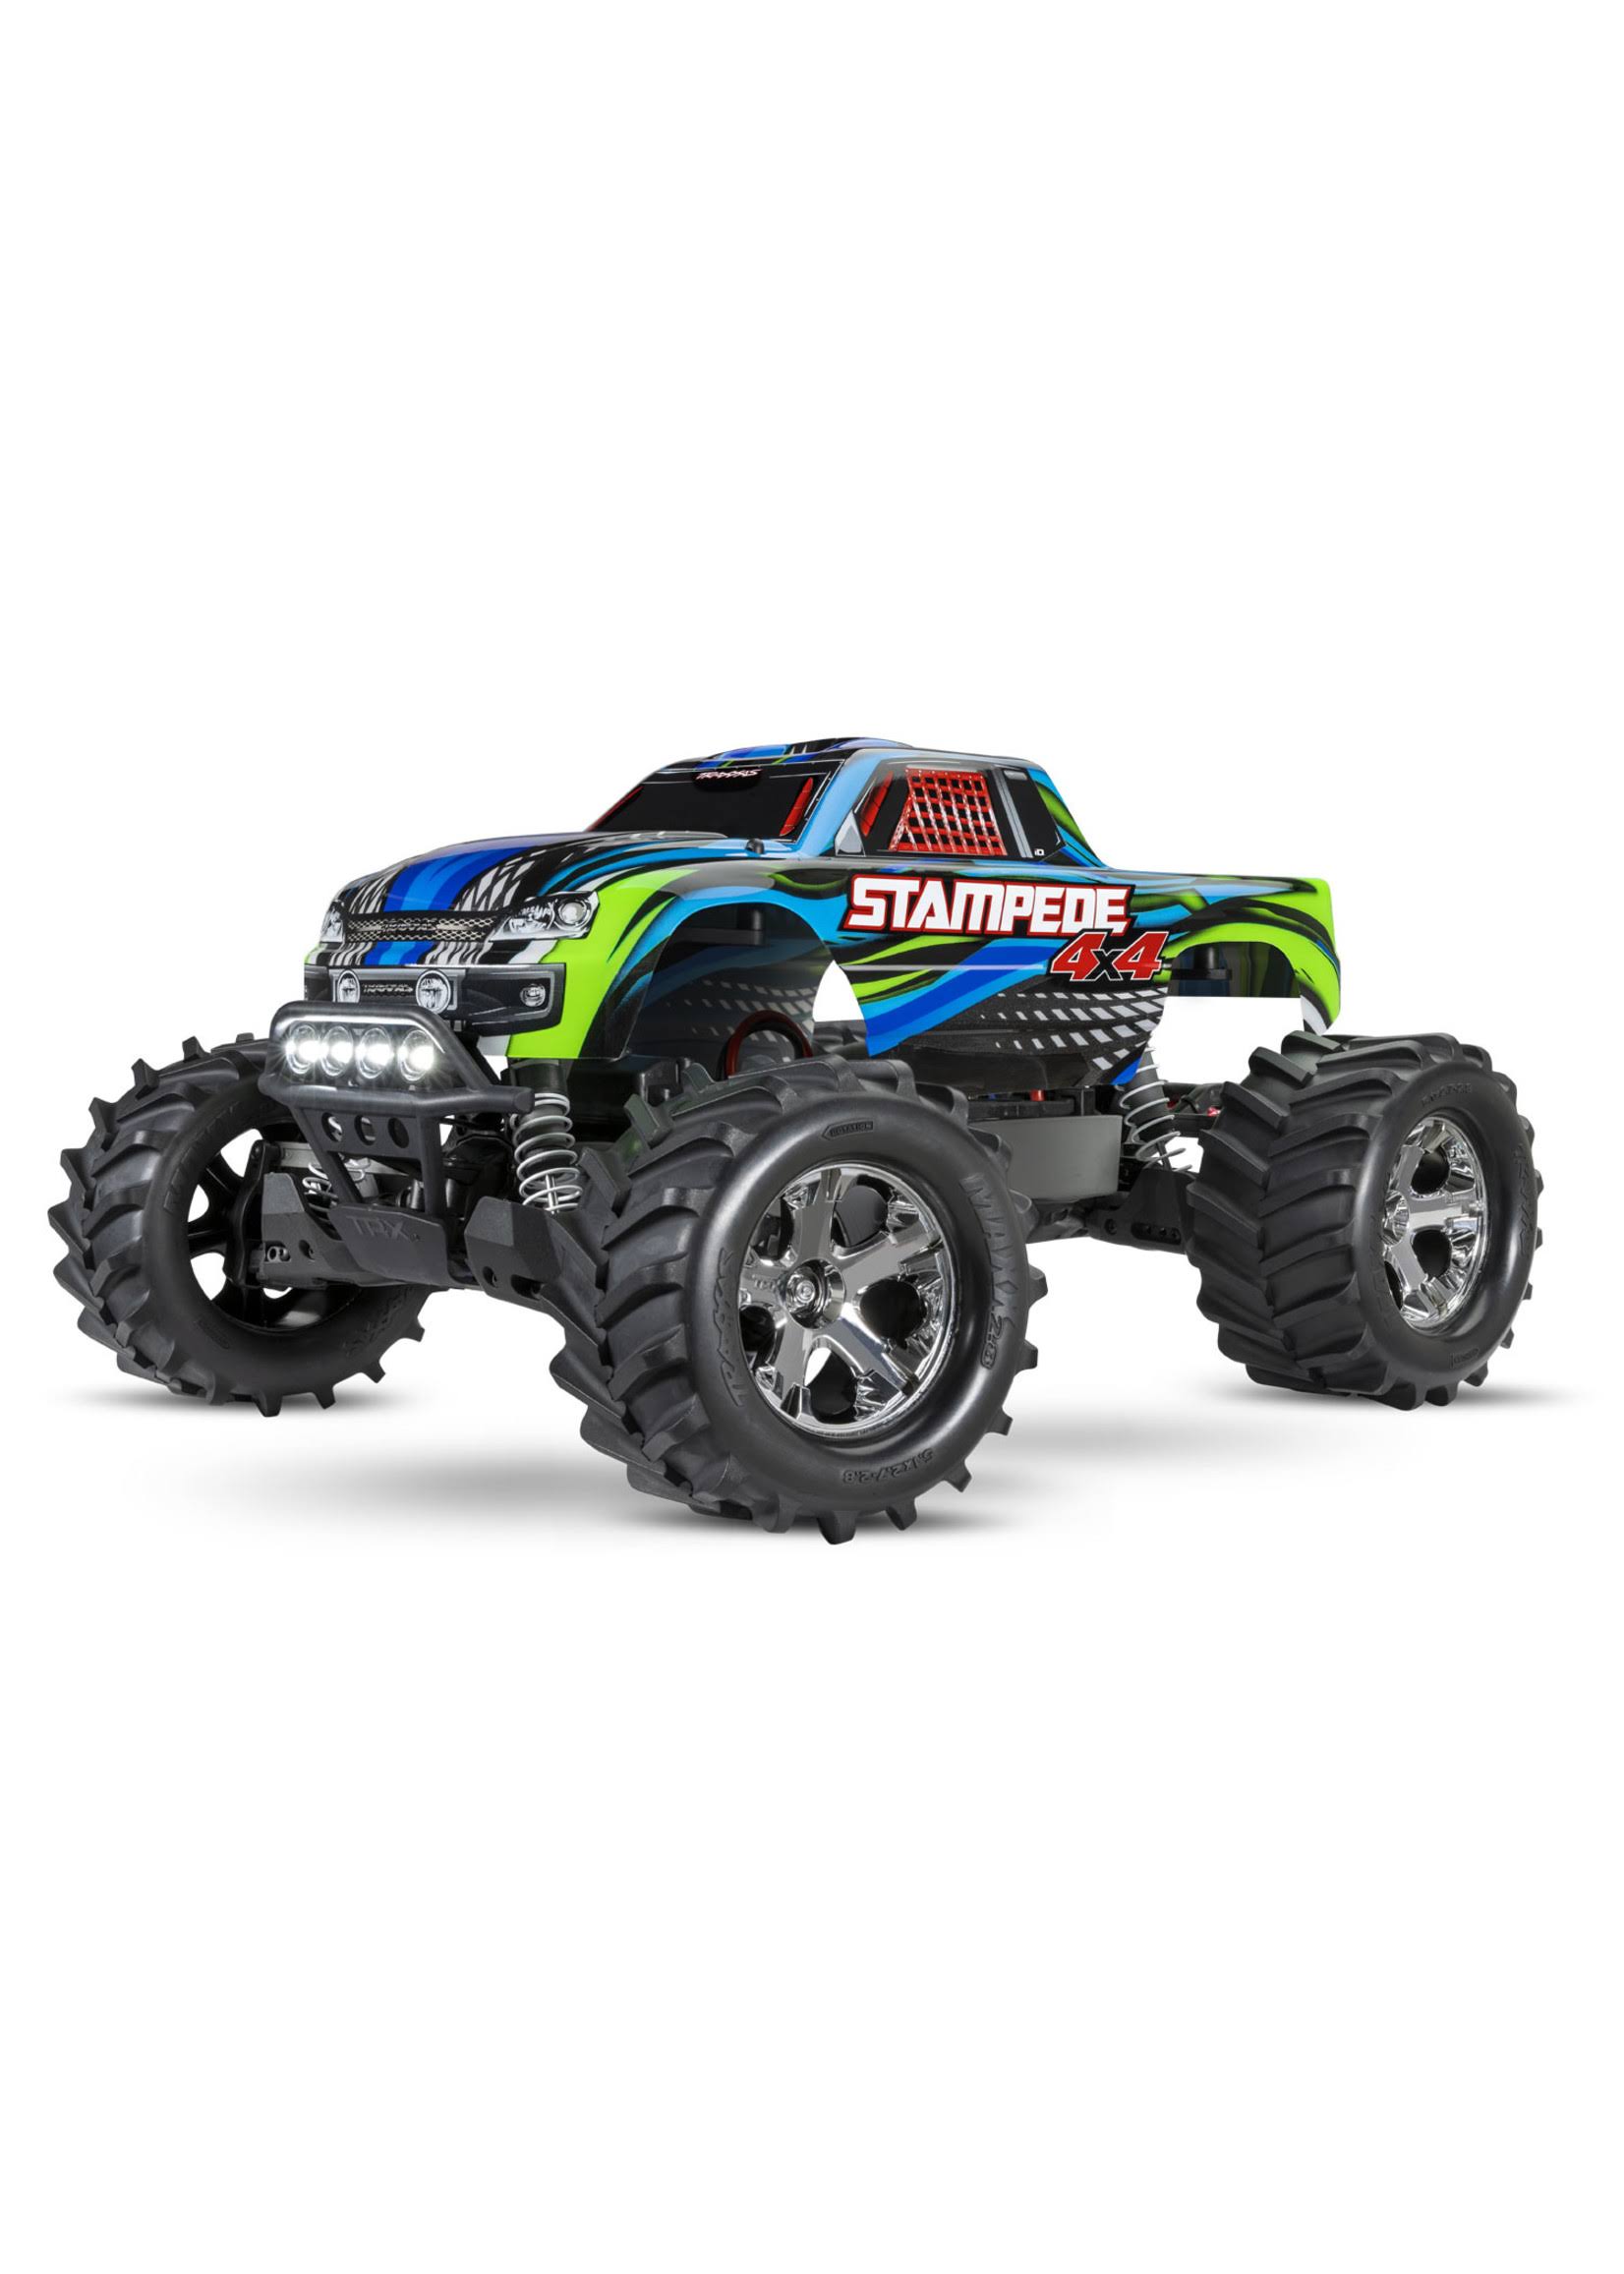 Traxxas Stampede 4x4 Brushed with Lights Blue TRX67054-61-BLU